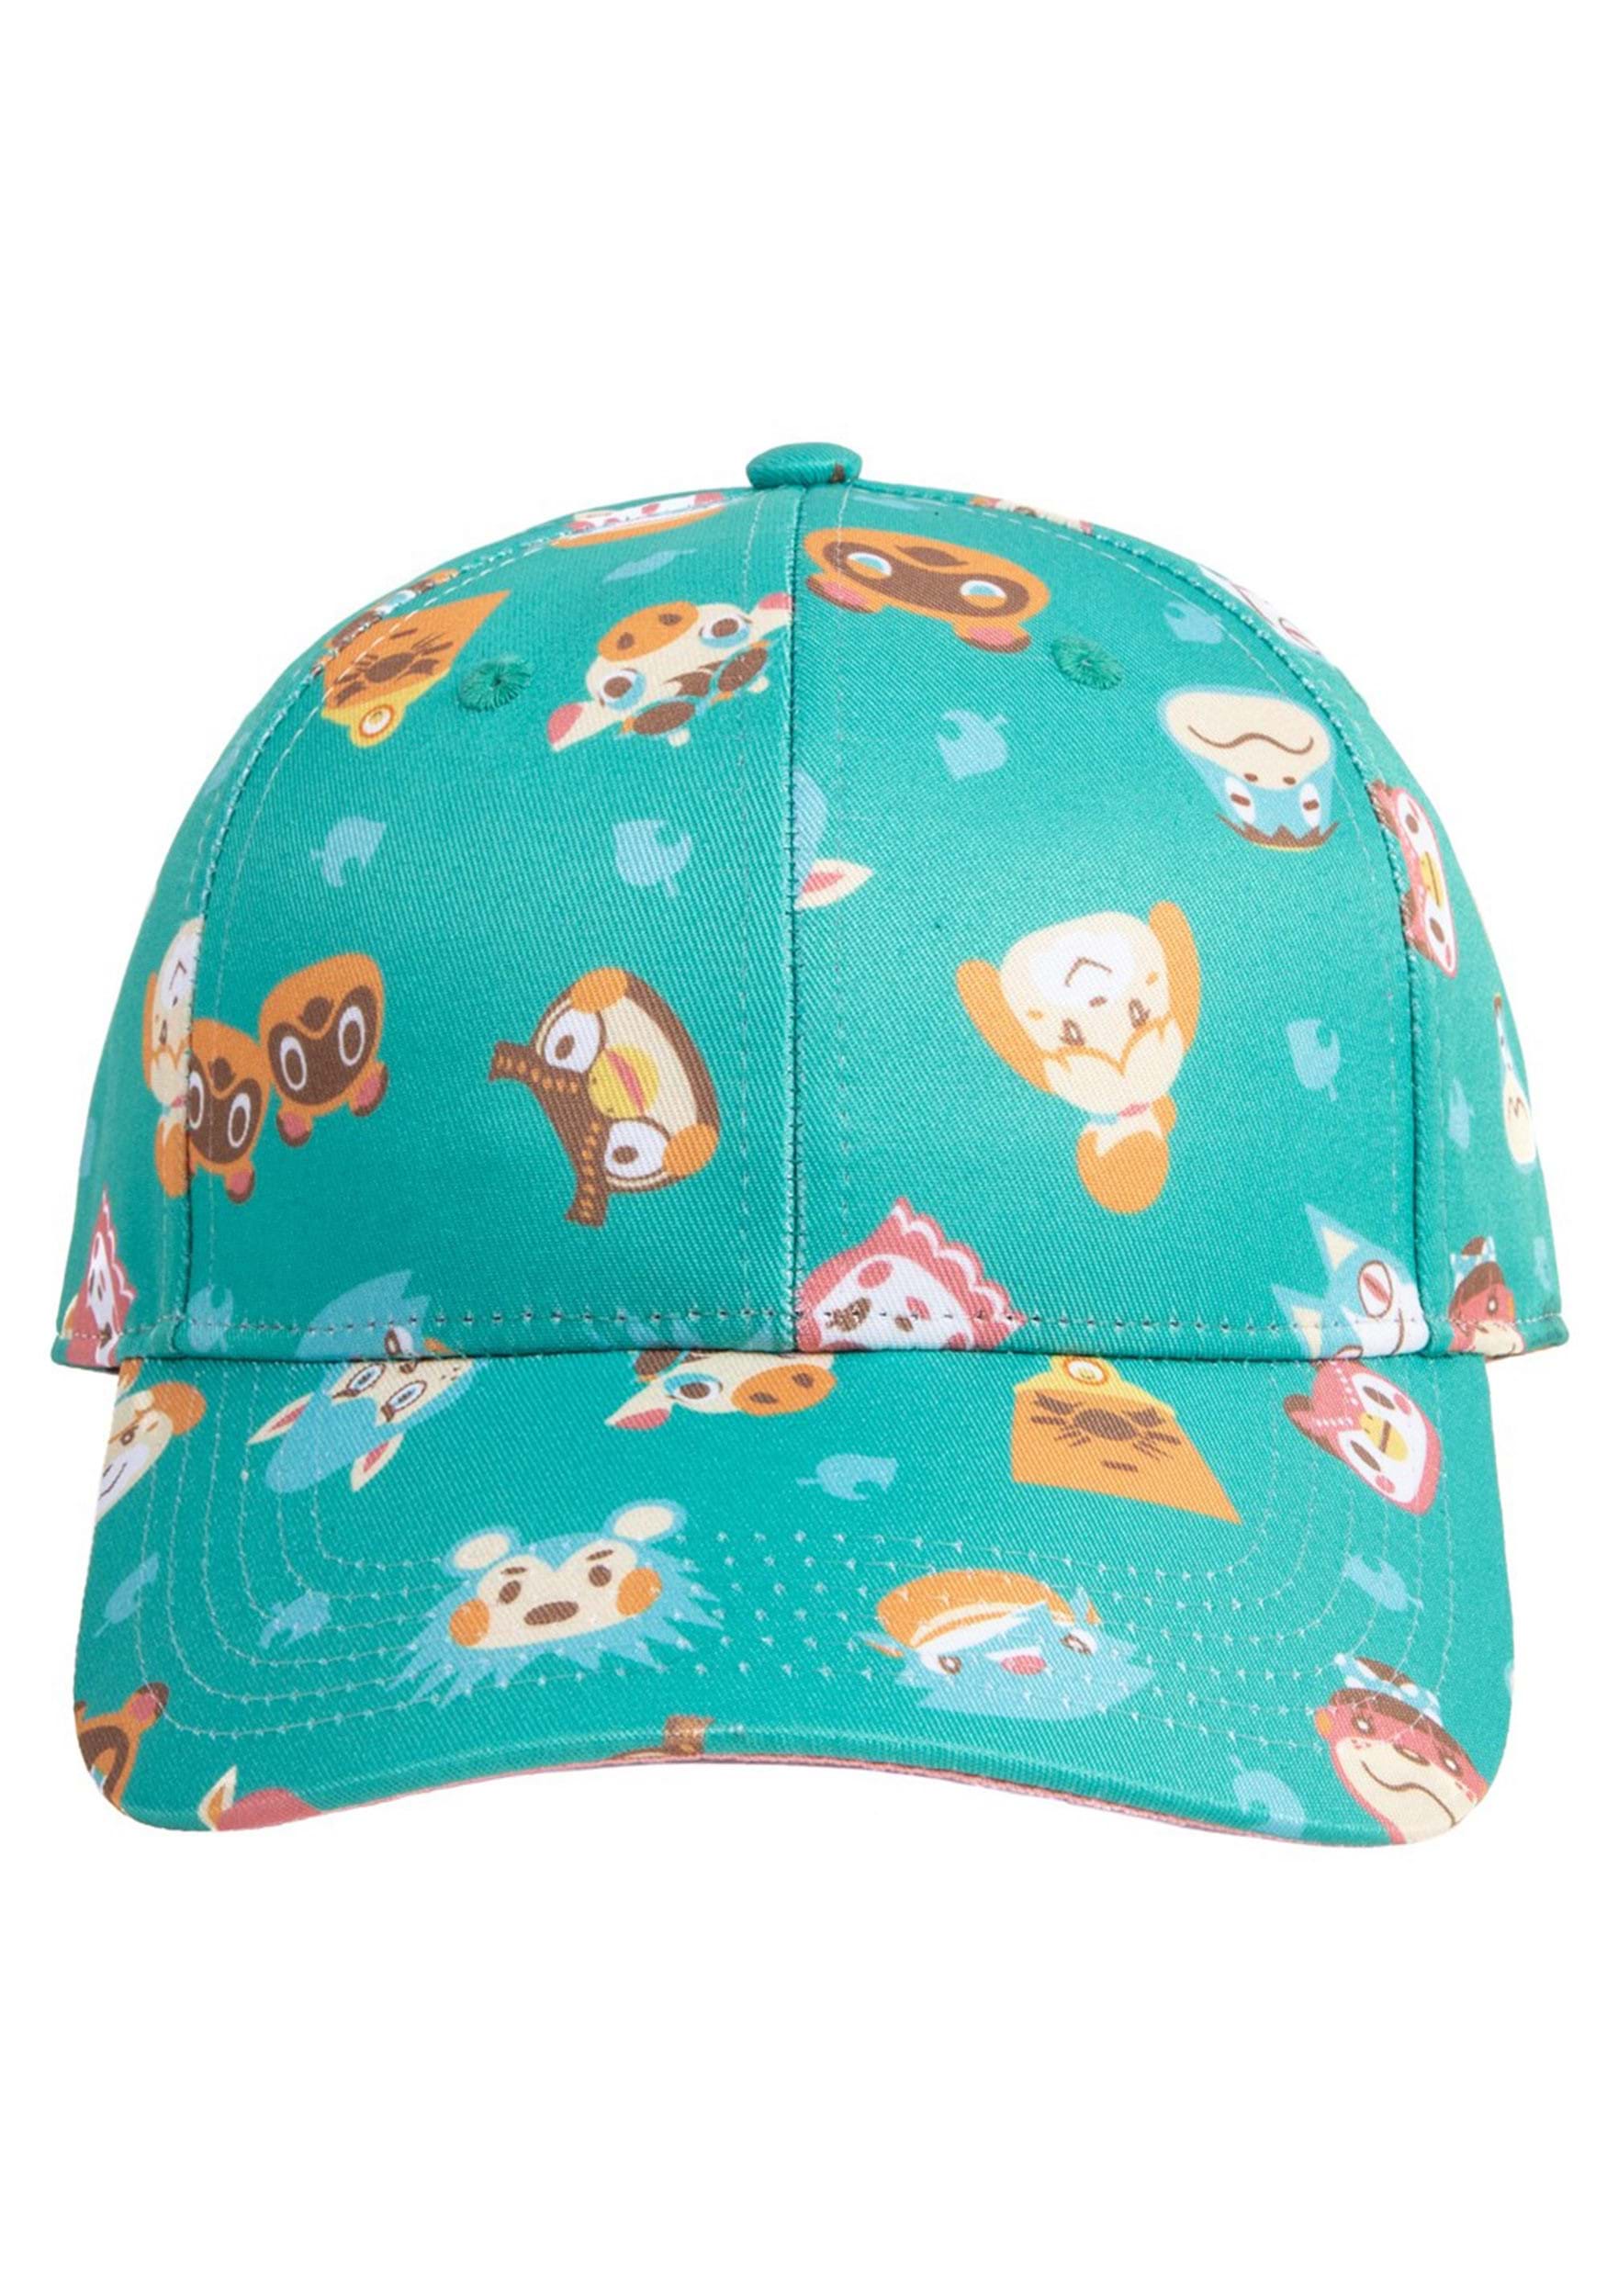 Animal Crossing All Over Print Hat | Hat Accessories